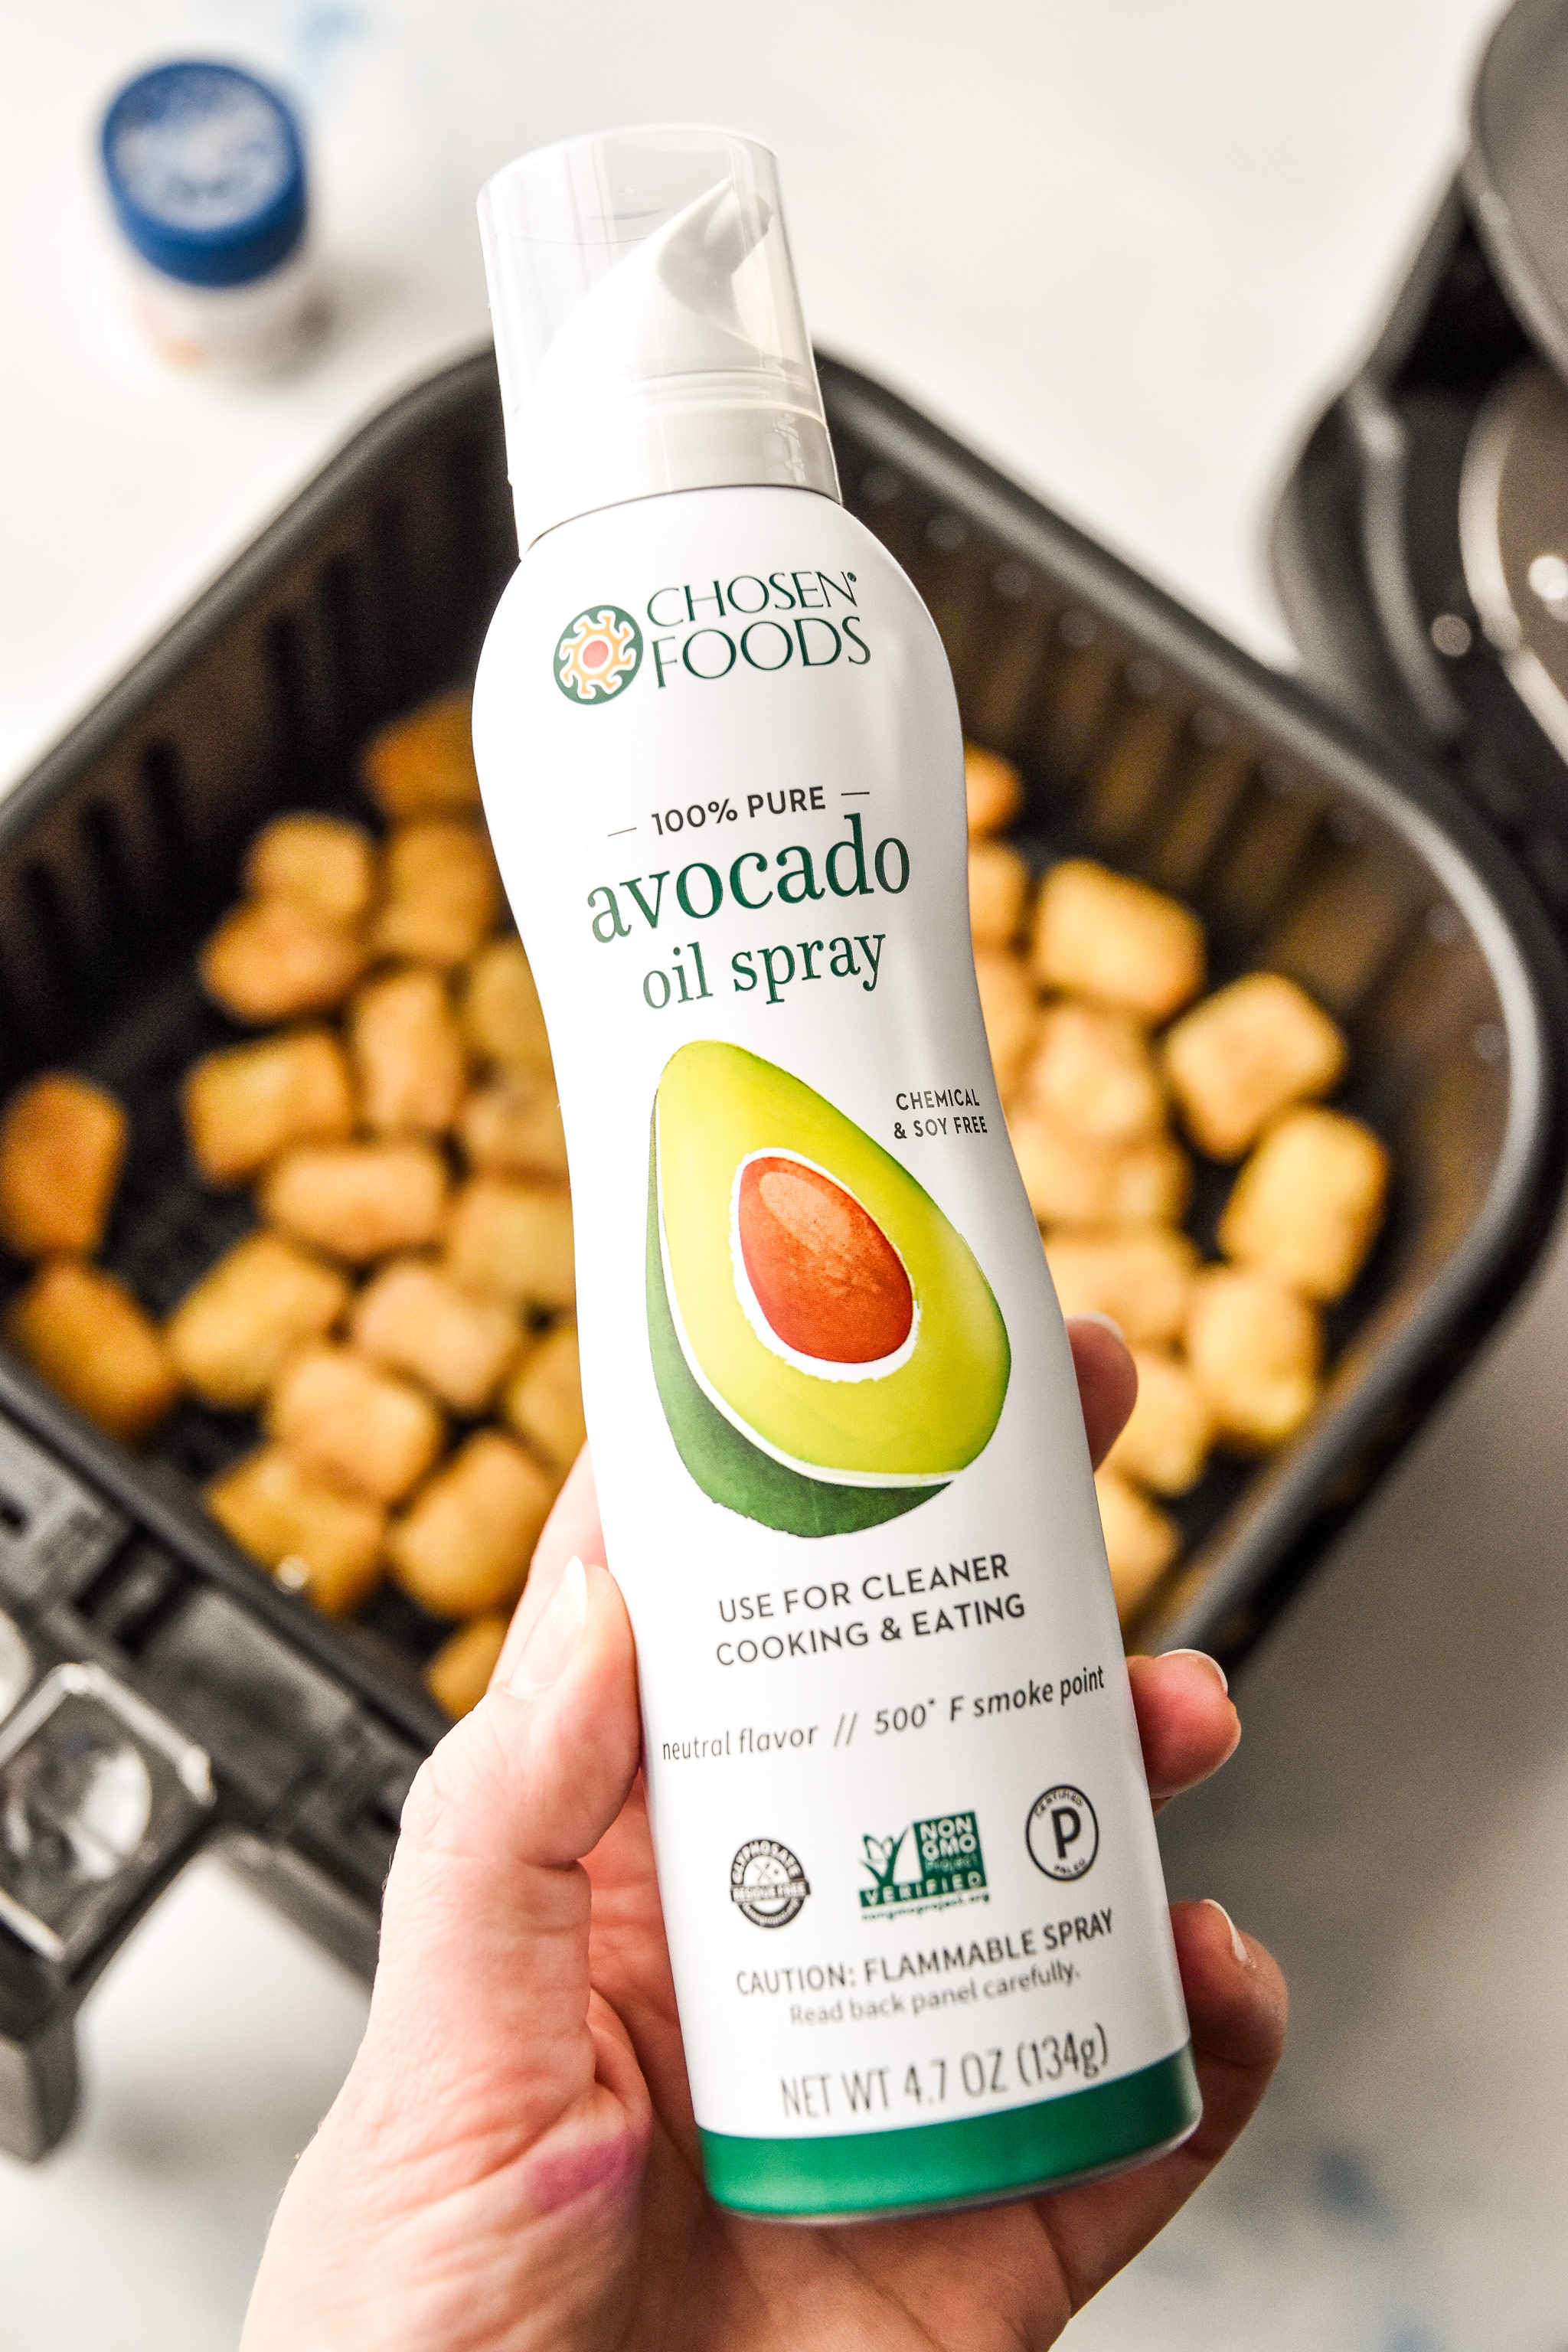 chosen foods avocado spray oil used for making tater tots in an air fryer